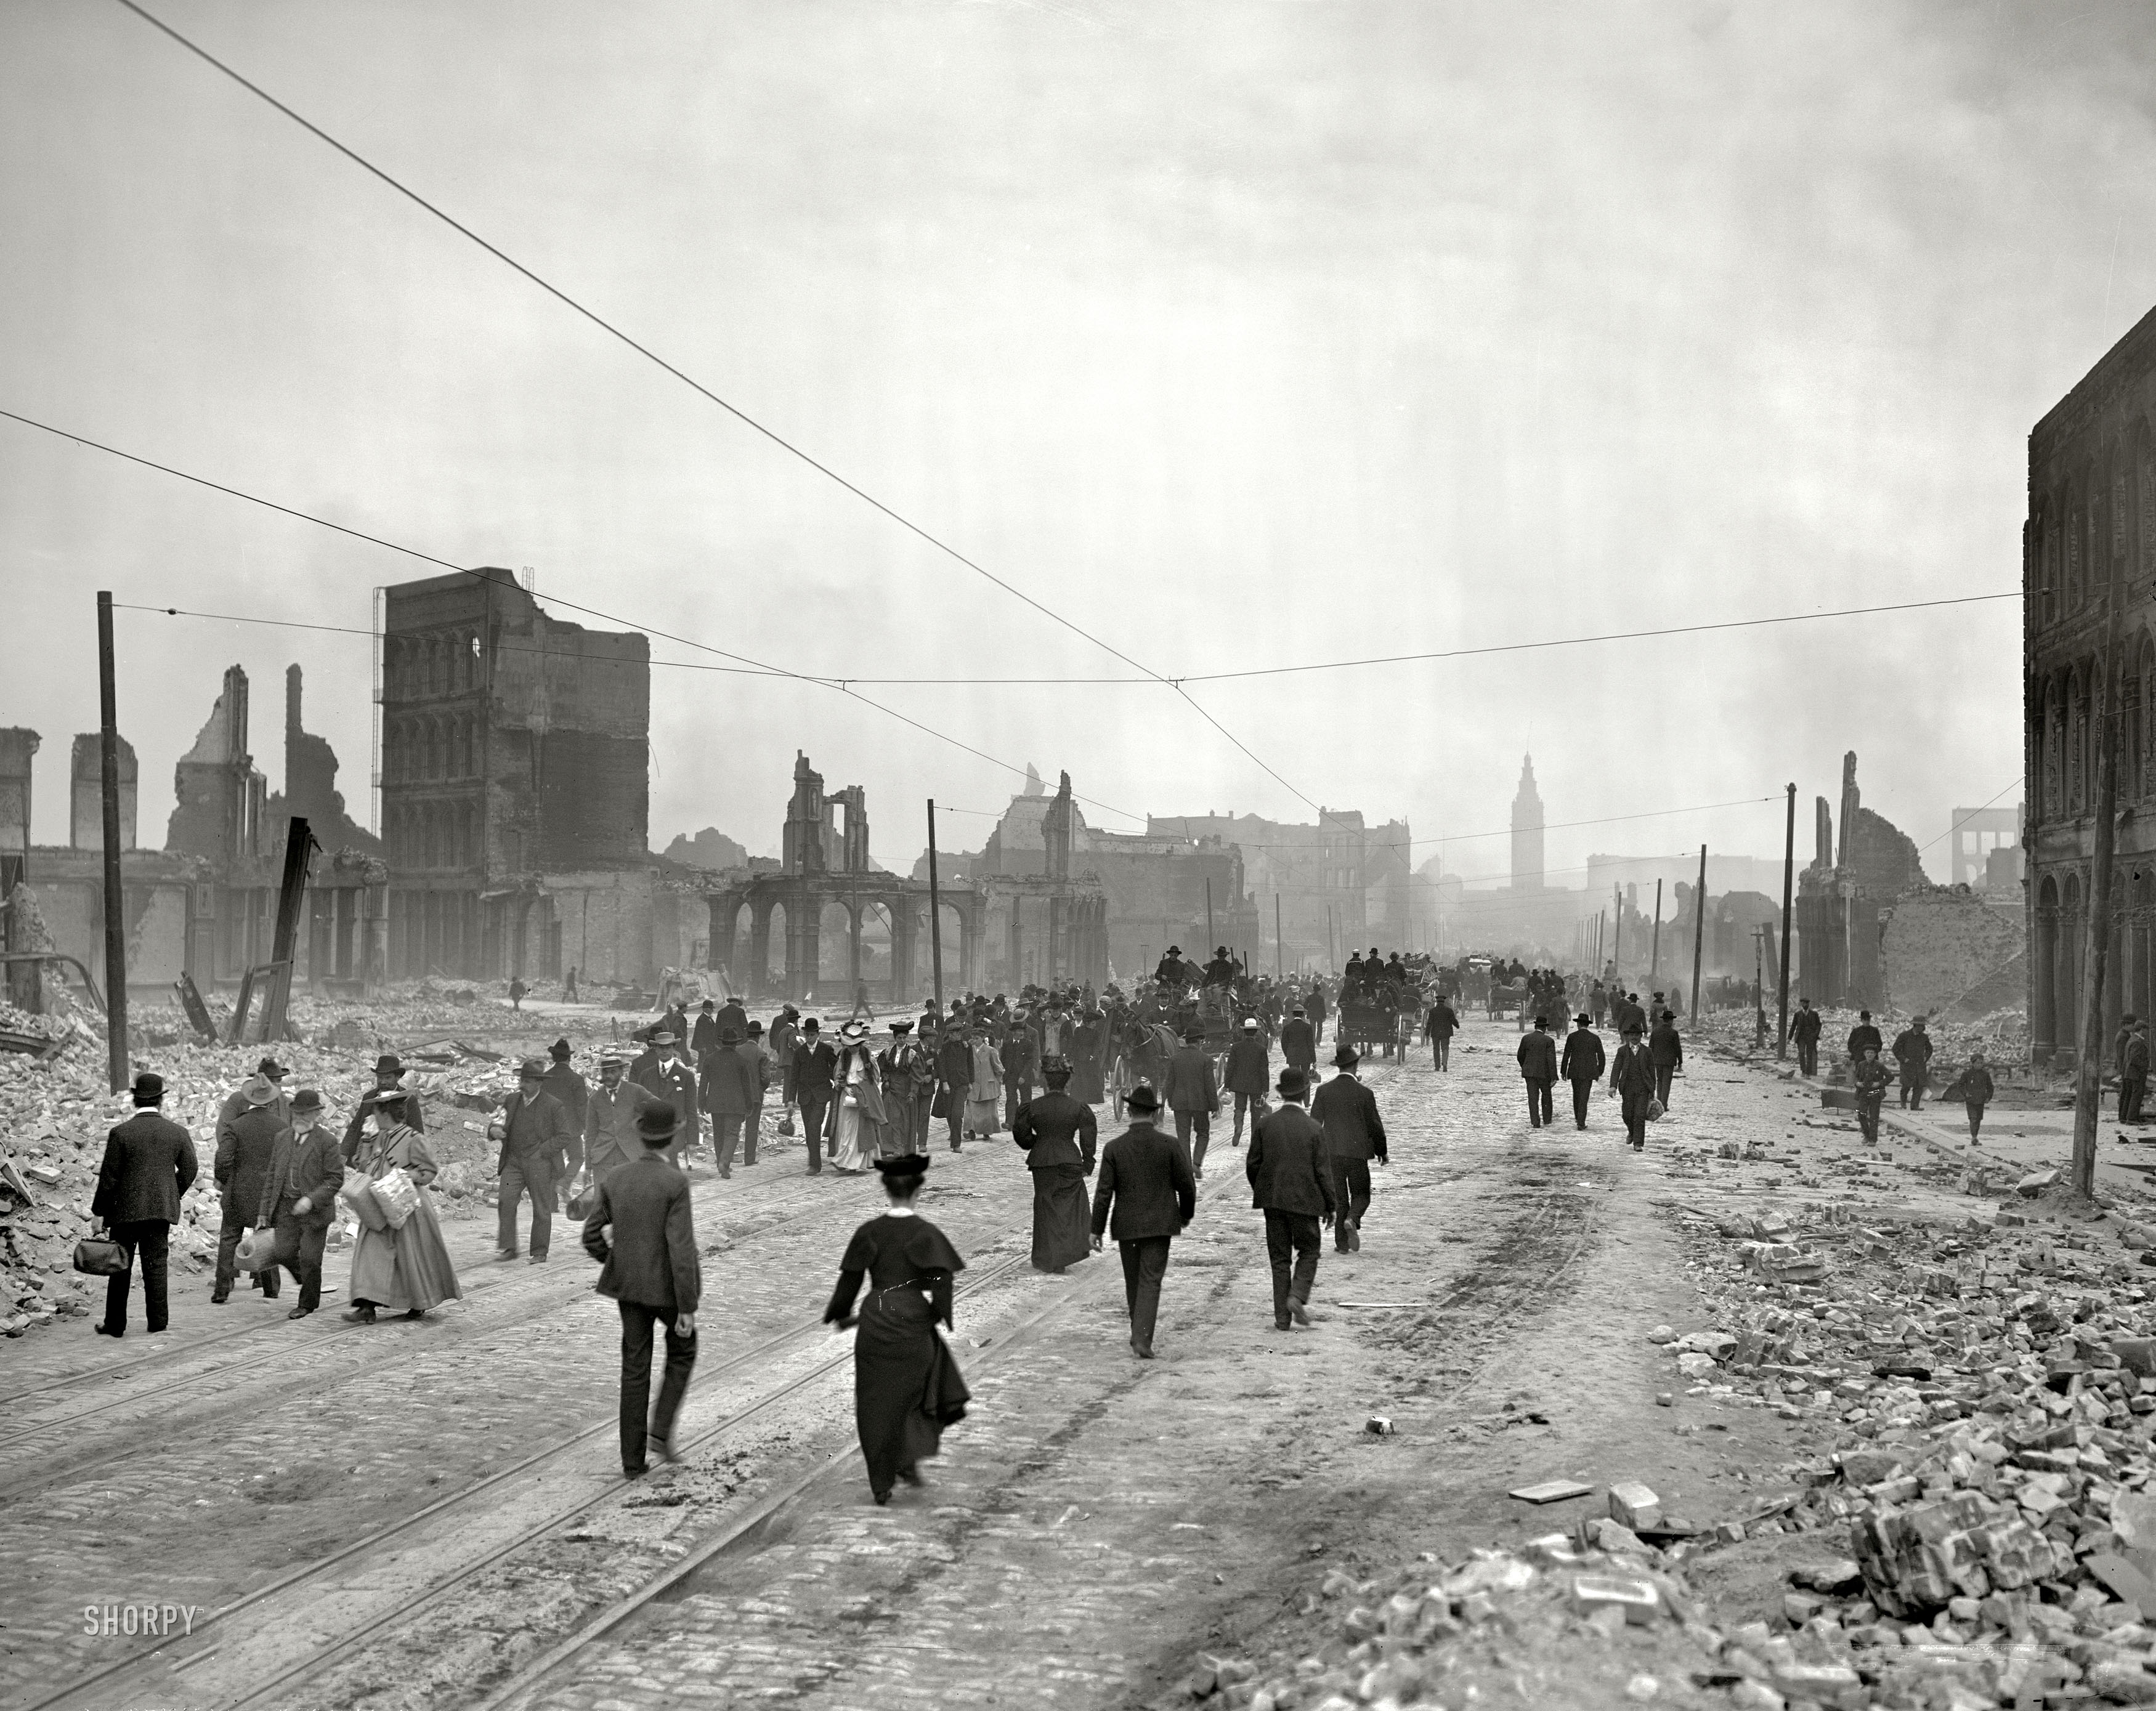 "Market Street toward ferry." San Francisco after the earthquake and fire of April 18, 1906. 8x10 inch glass negative, Detroit Publishing Company. View full size.